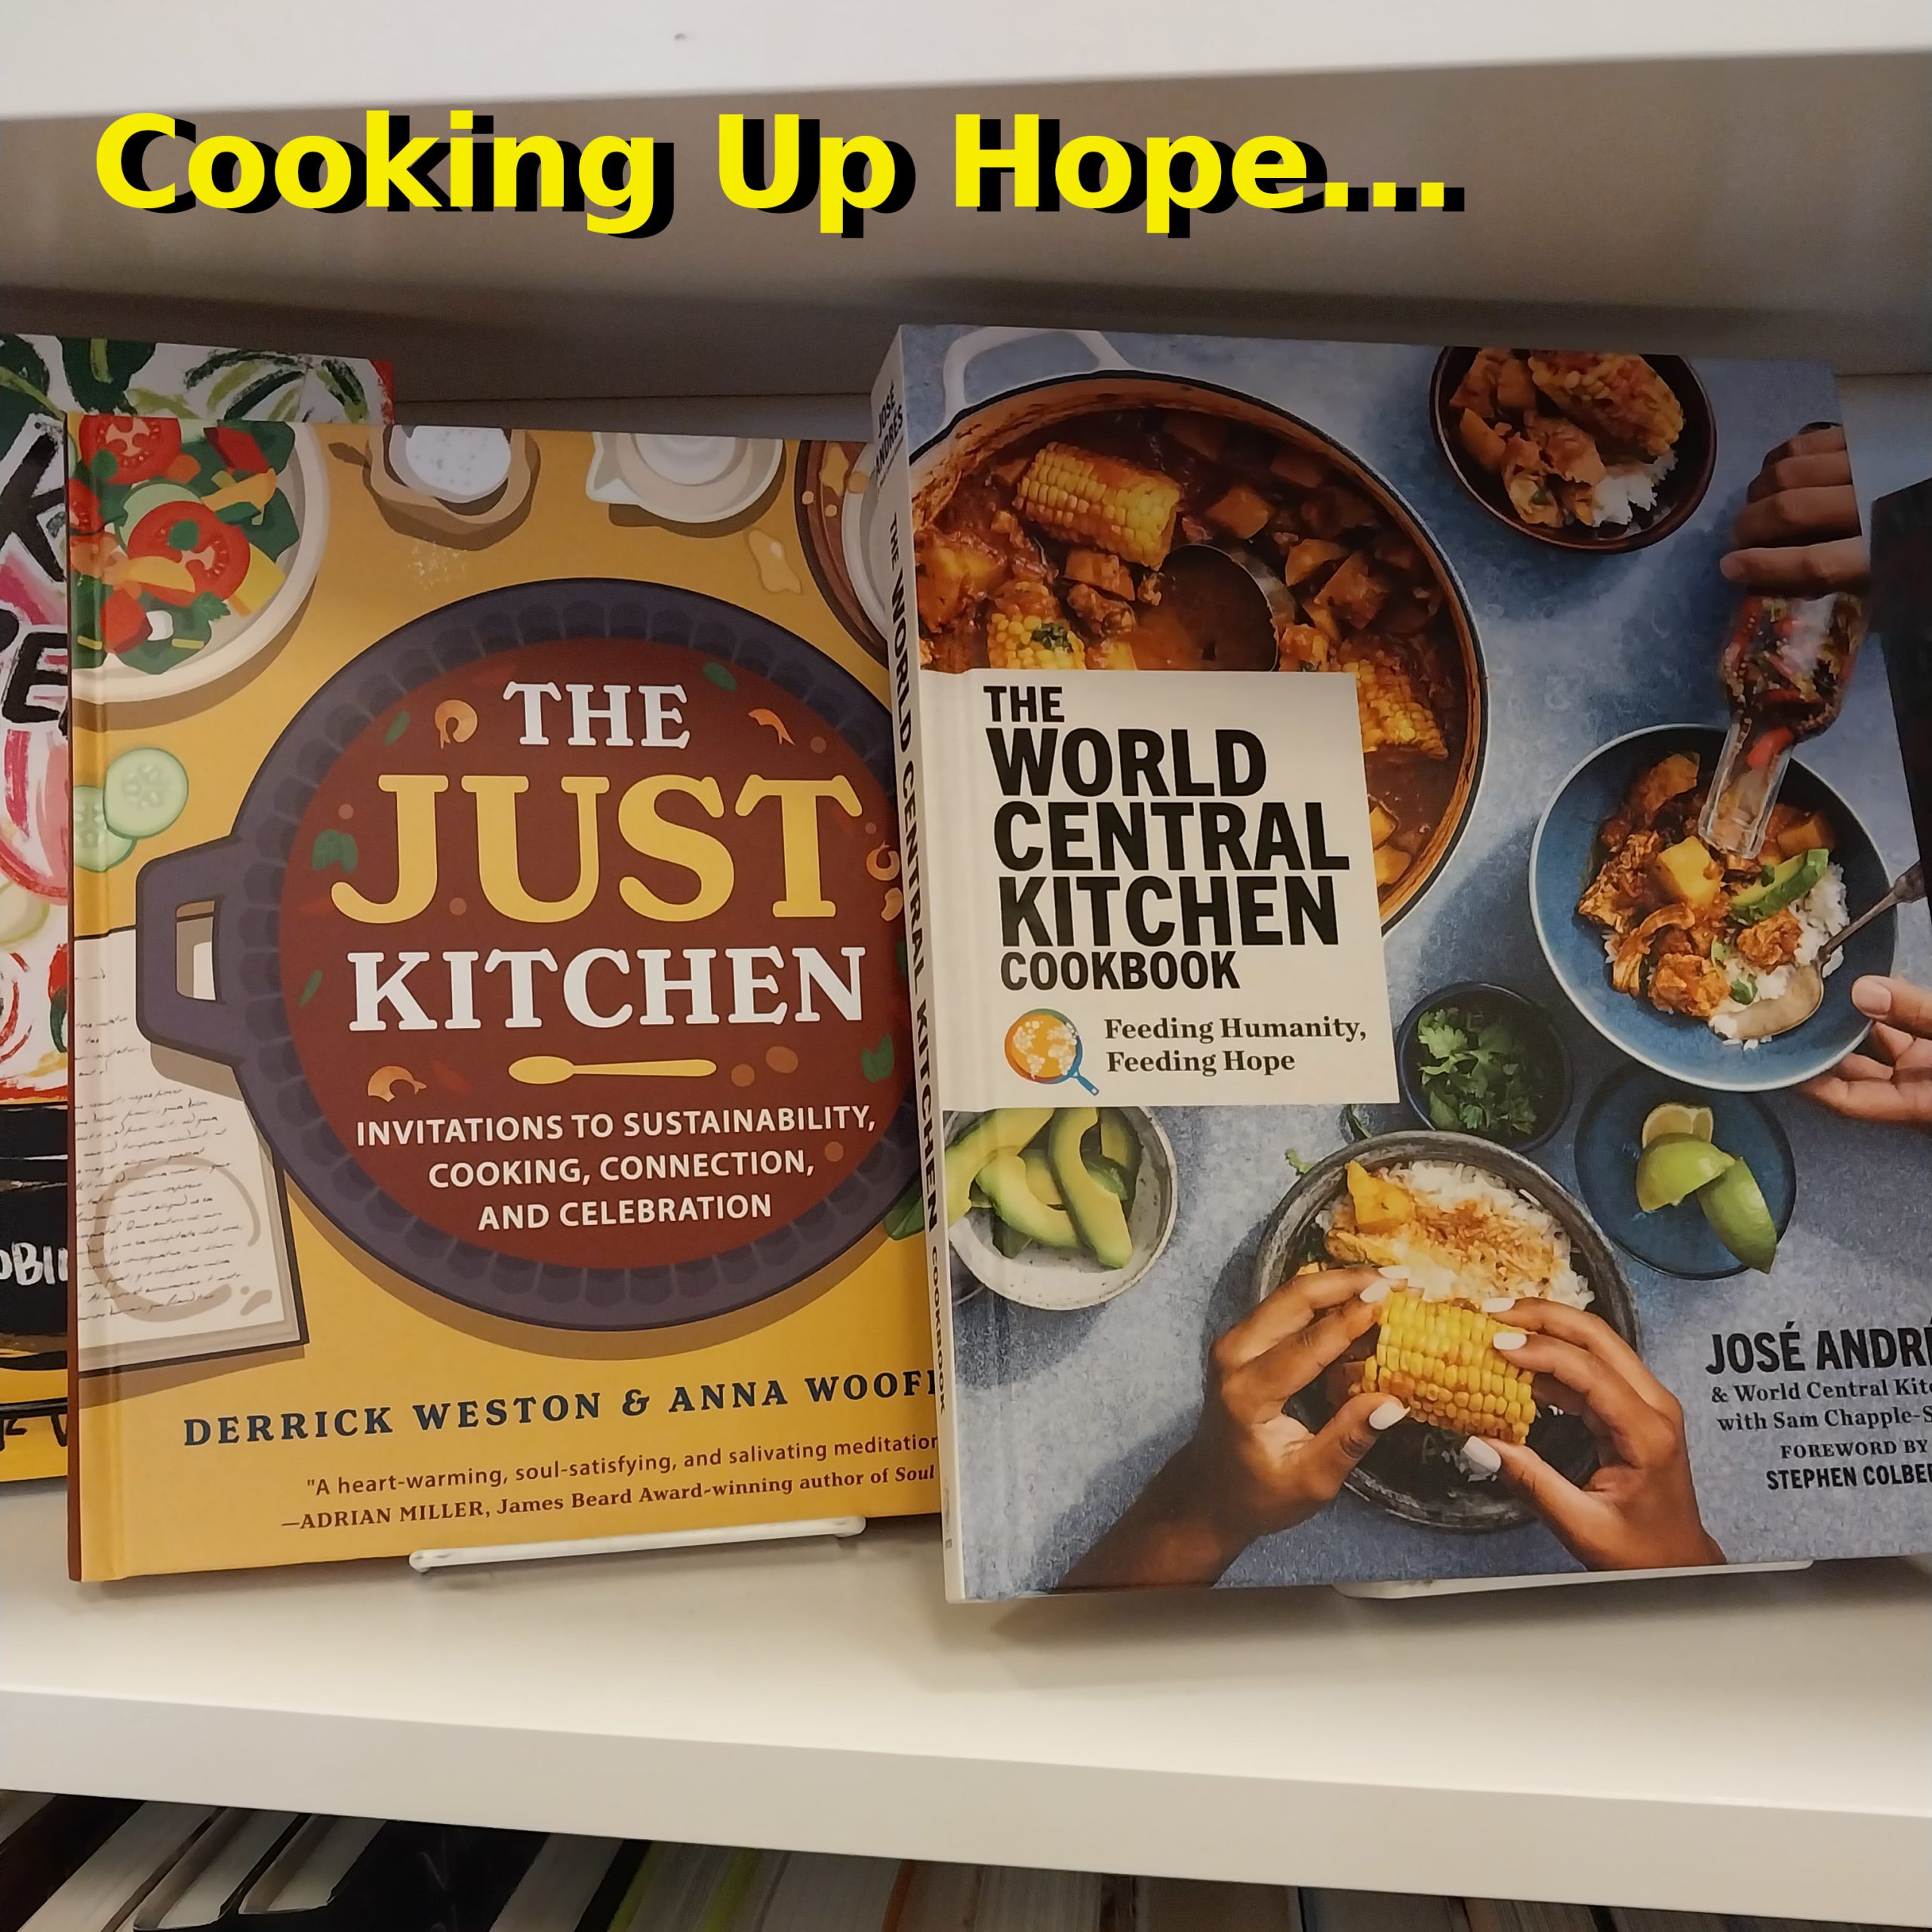 Two books, The Just Kitchen and The World Central Kitchen Cookbook